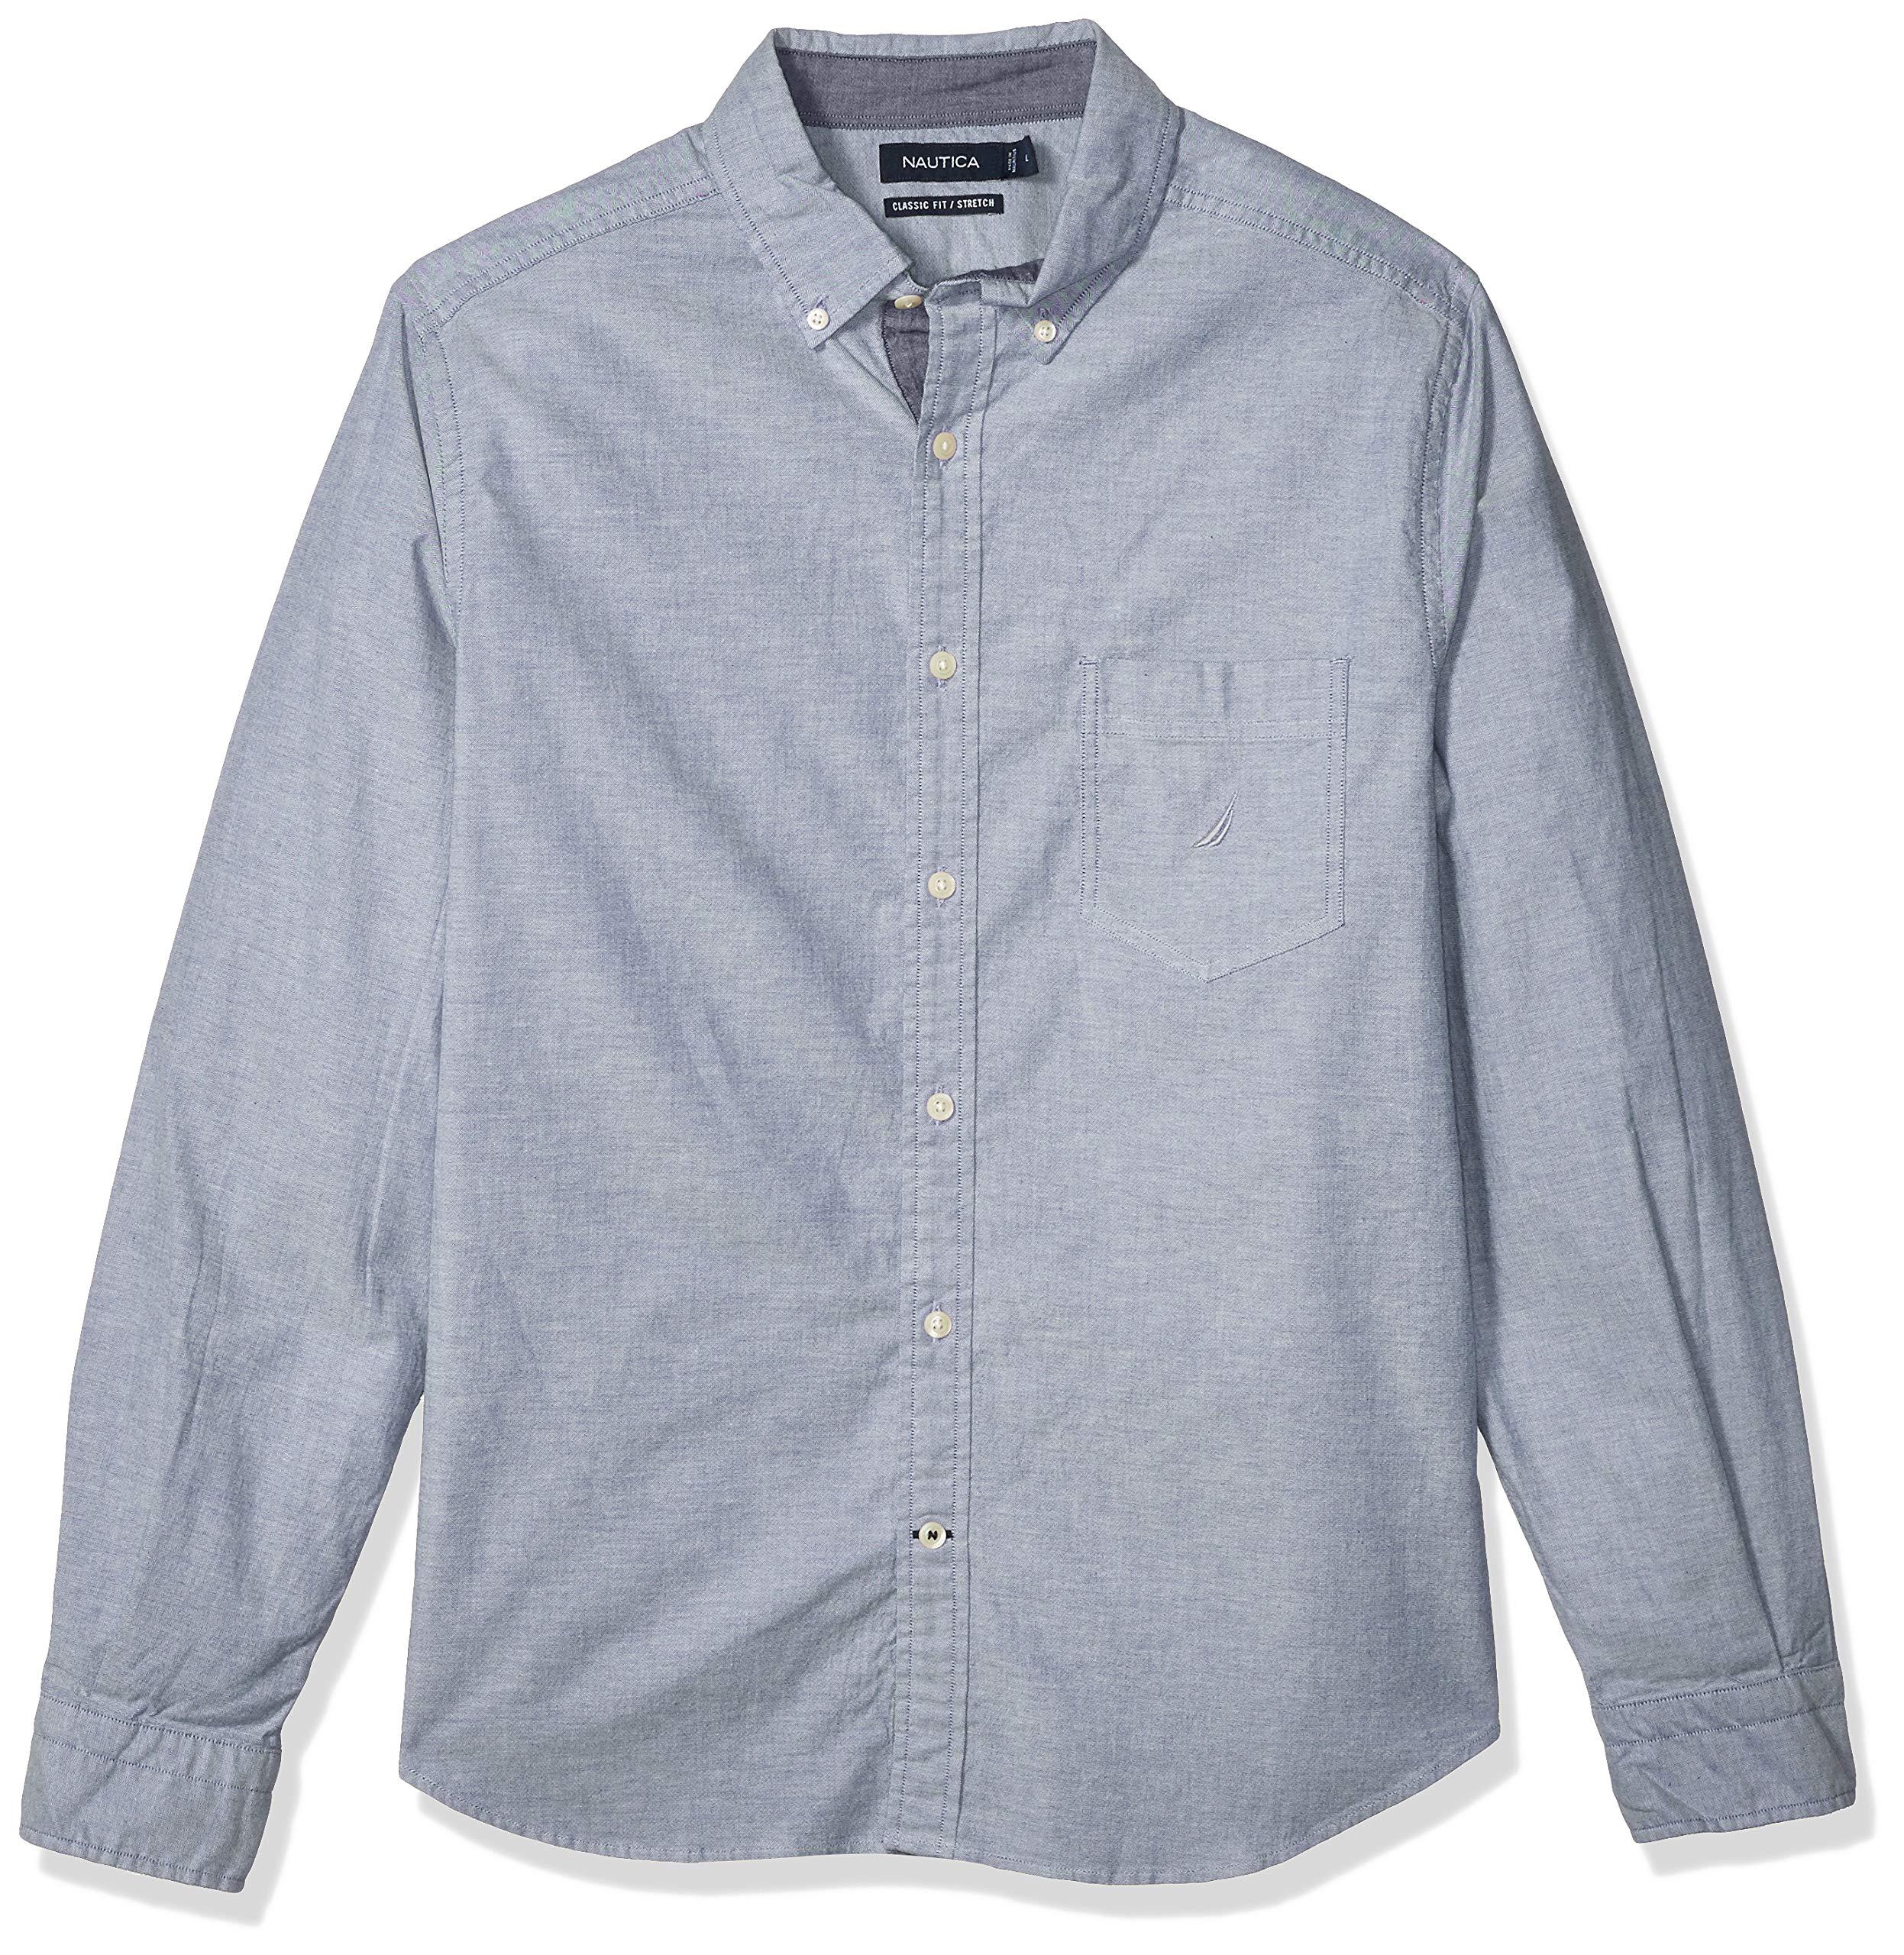 Nautica Classic Fit Oxford Shirt in Blue for Men - Lyst